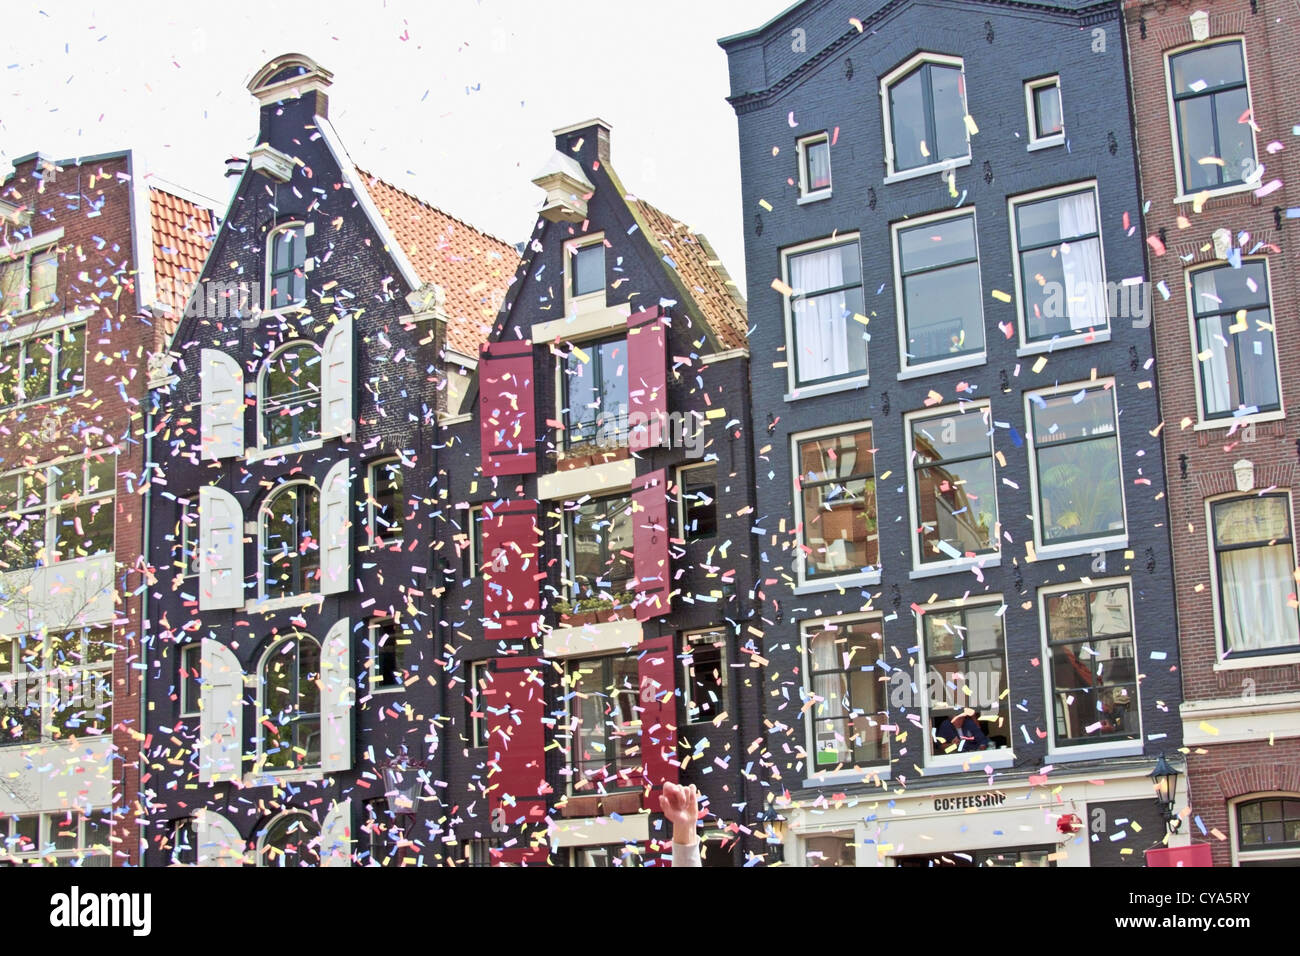 Amsterdam celebrating queens day in the Netherlands Stock Photo Alamy